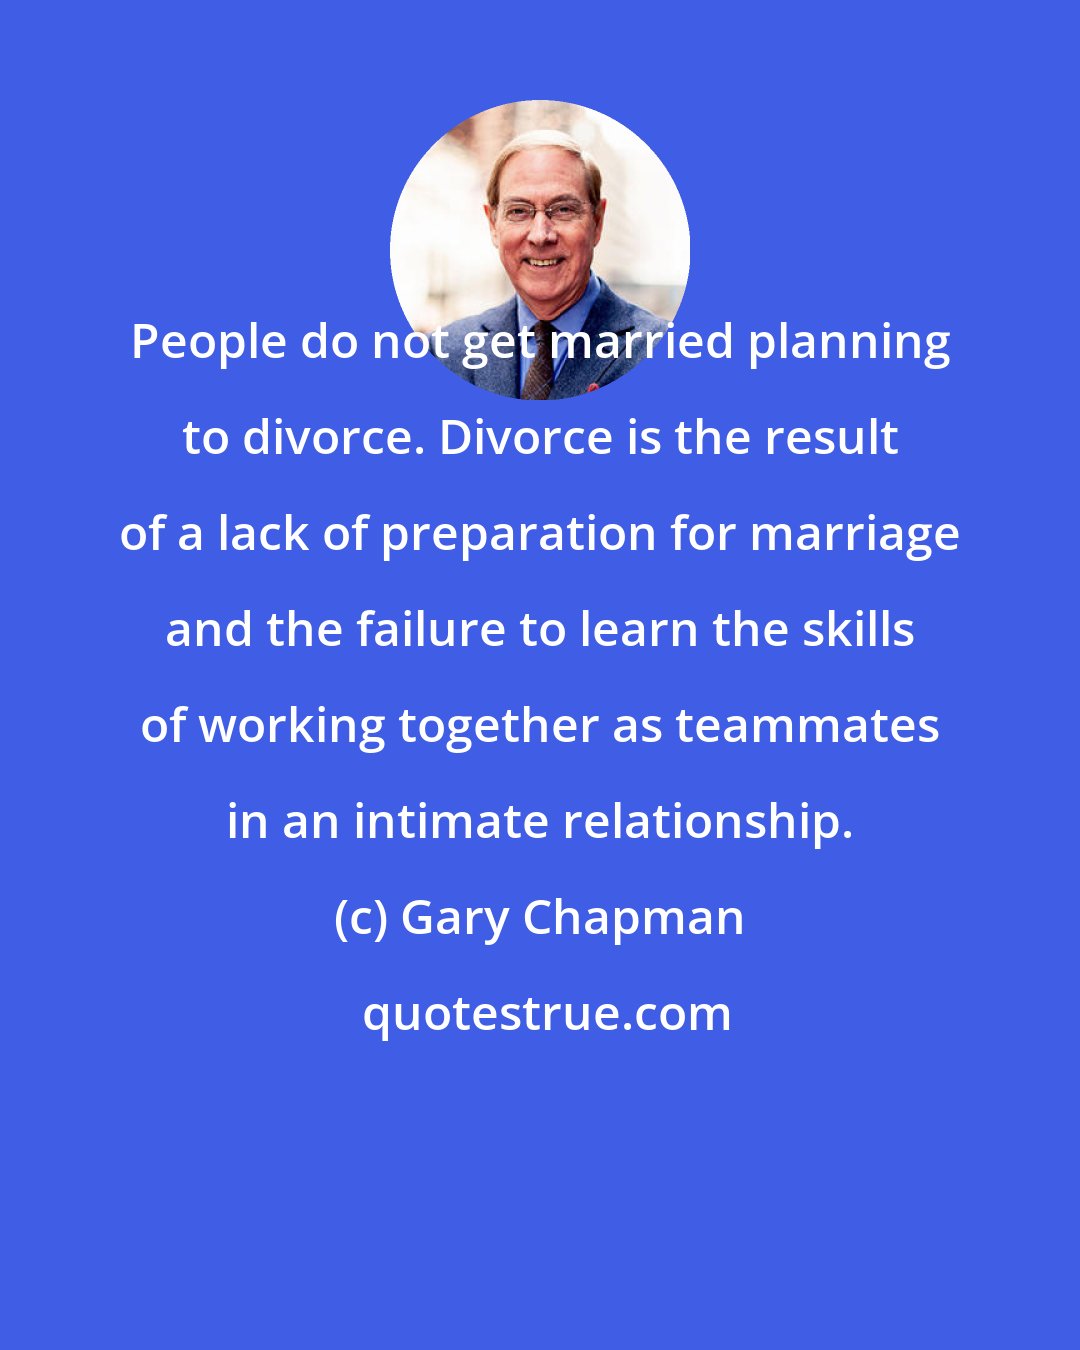 Gary Chapman: People do not get married planning to divorce. Divorce is the result of a lack of preparation for marriage and the failure to learn the skills of working together as teammates in an intimate relationship.